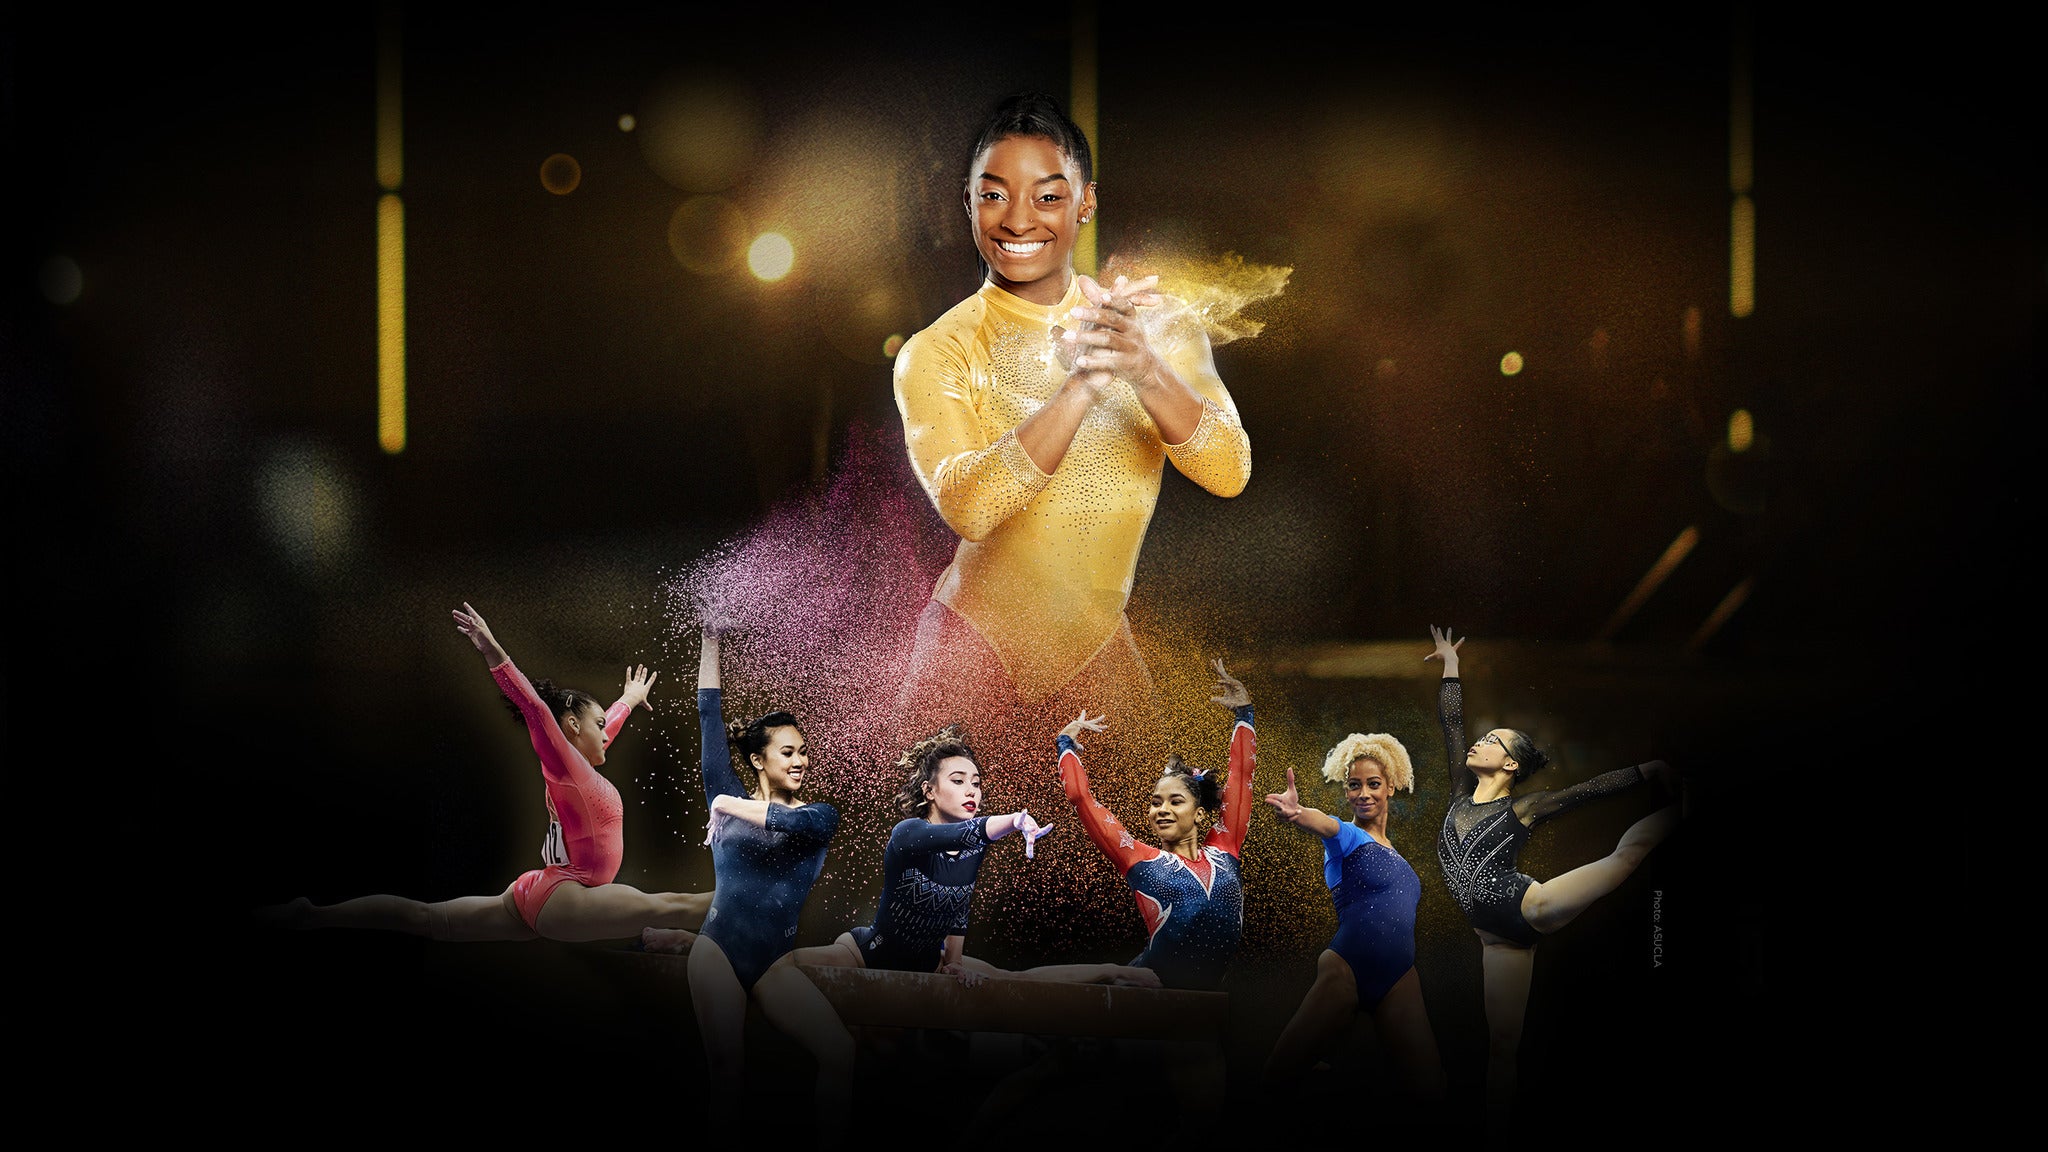 G.O.A.T. Gold Over America Tour Starring Simone Biles in Oklahoma City promo photo for G.o.a.t. presale offer code